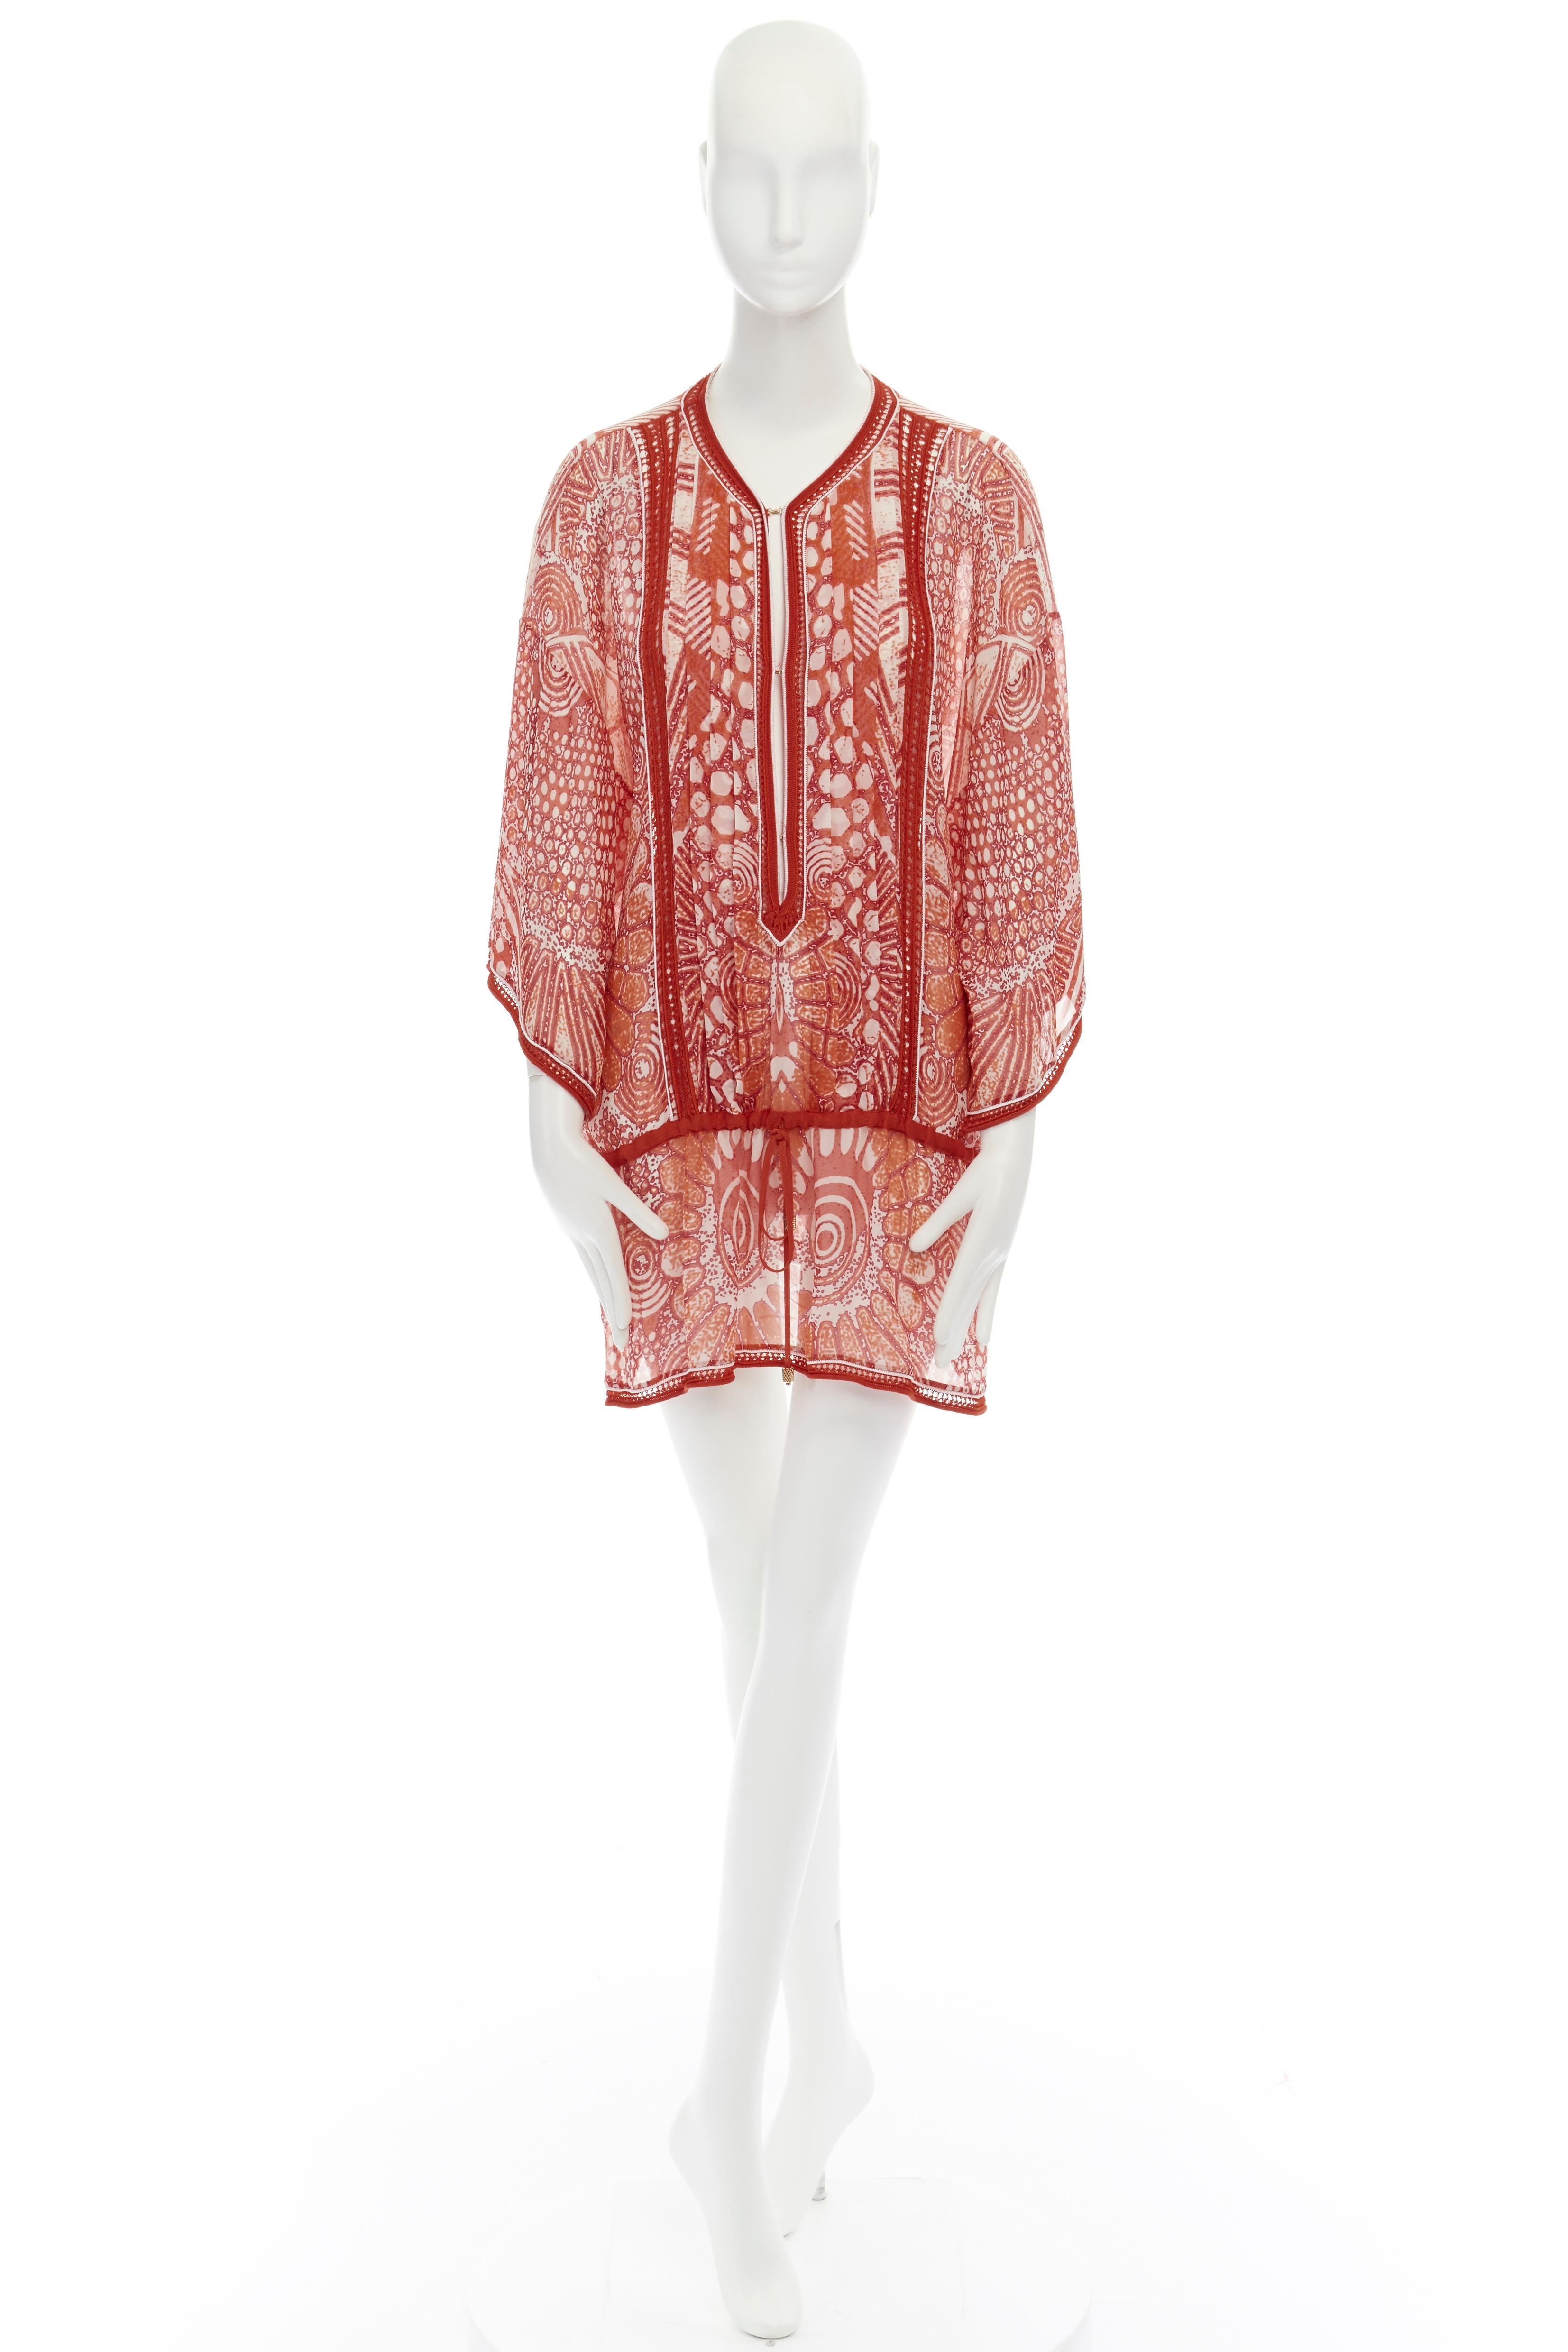 ROBERTO CAVALLI 100% silk red tropical floral crochet seam poncho cover up top S
Brand: Roberto Cavalli
Designer: Roberto Cavalli
Model Name / Style: Silk coverup
Material: Silk
Color: Red
Pattern: Floral
Closure: Hook & eye
Extra Detail: 100% silk.